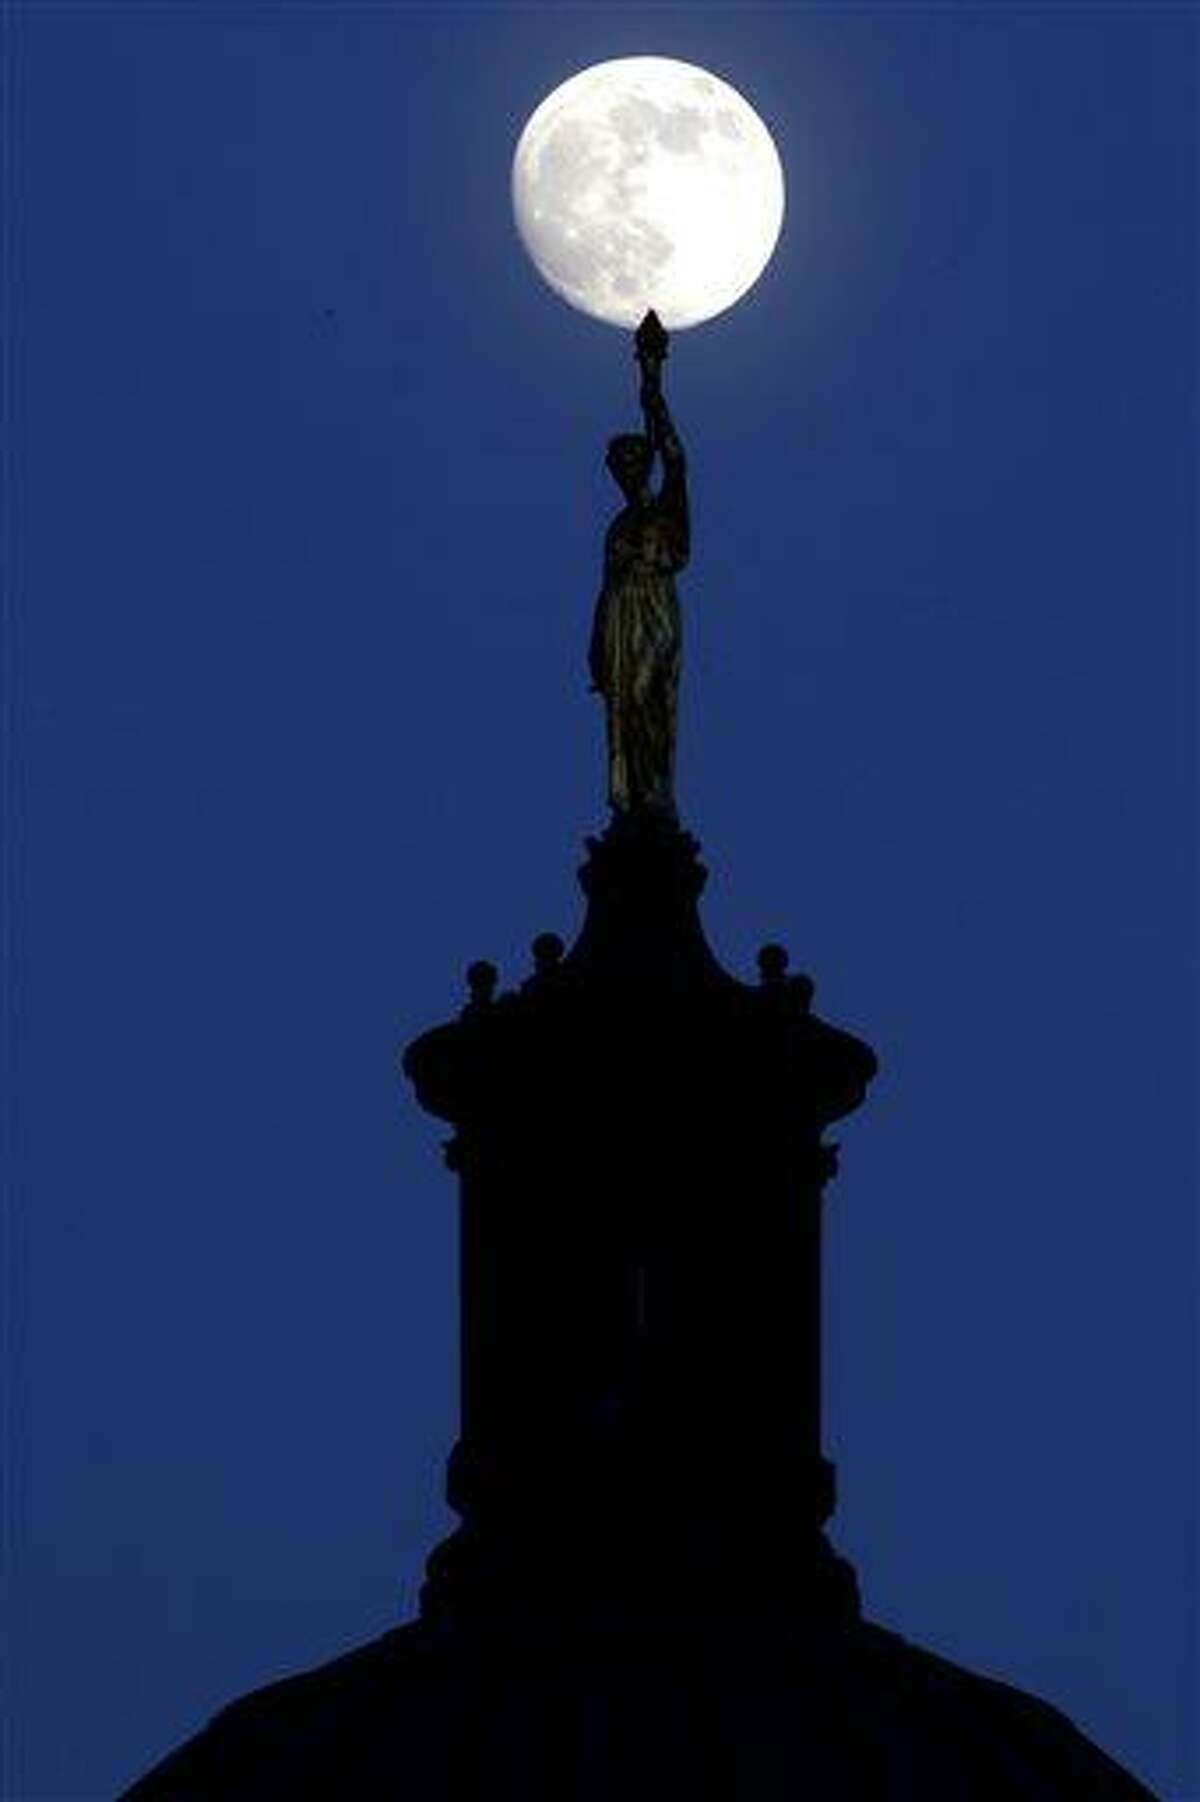 The moon in its waxing gibbous stage shines over a statue entitled "Enlightenment Giving Power" by John Gelert, which sits at the top of the dome of the Bergen County Courthouse in Hackensack, N.J., Friday, June 21, 2013. The moon, which will reach its full stage on Sunday, is expected to be 13.5 percent closer to earth during a phenomenon known as supermoon. (AP Photo/Julio Cortez)